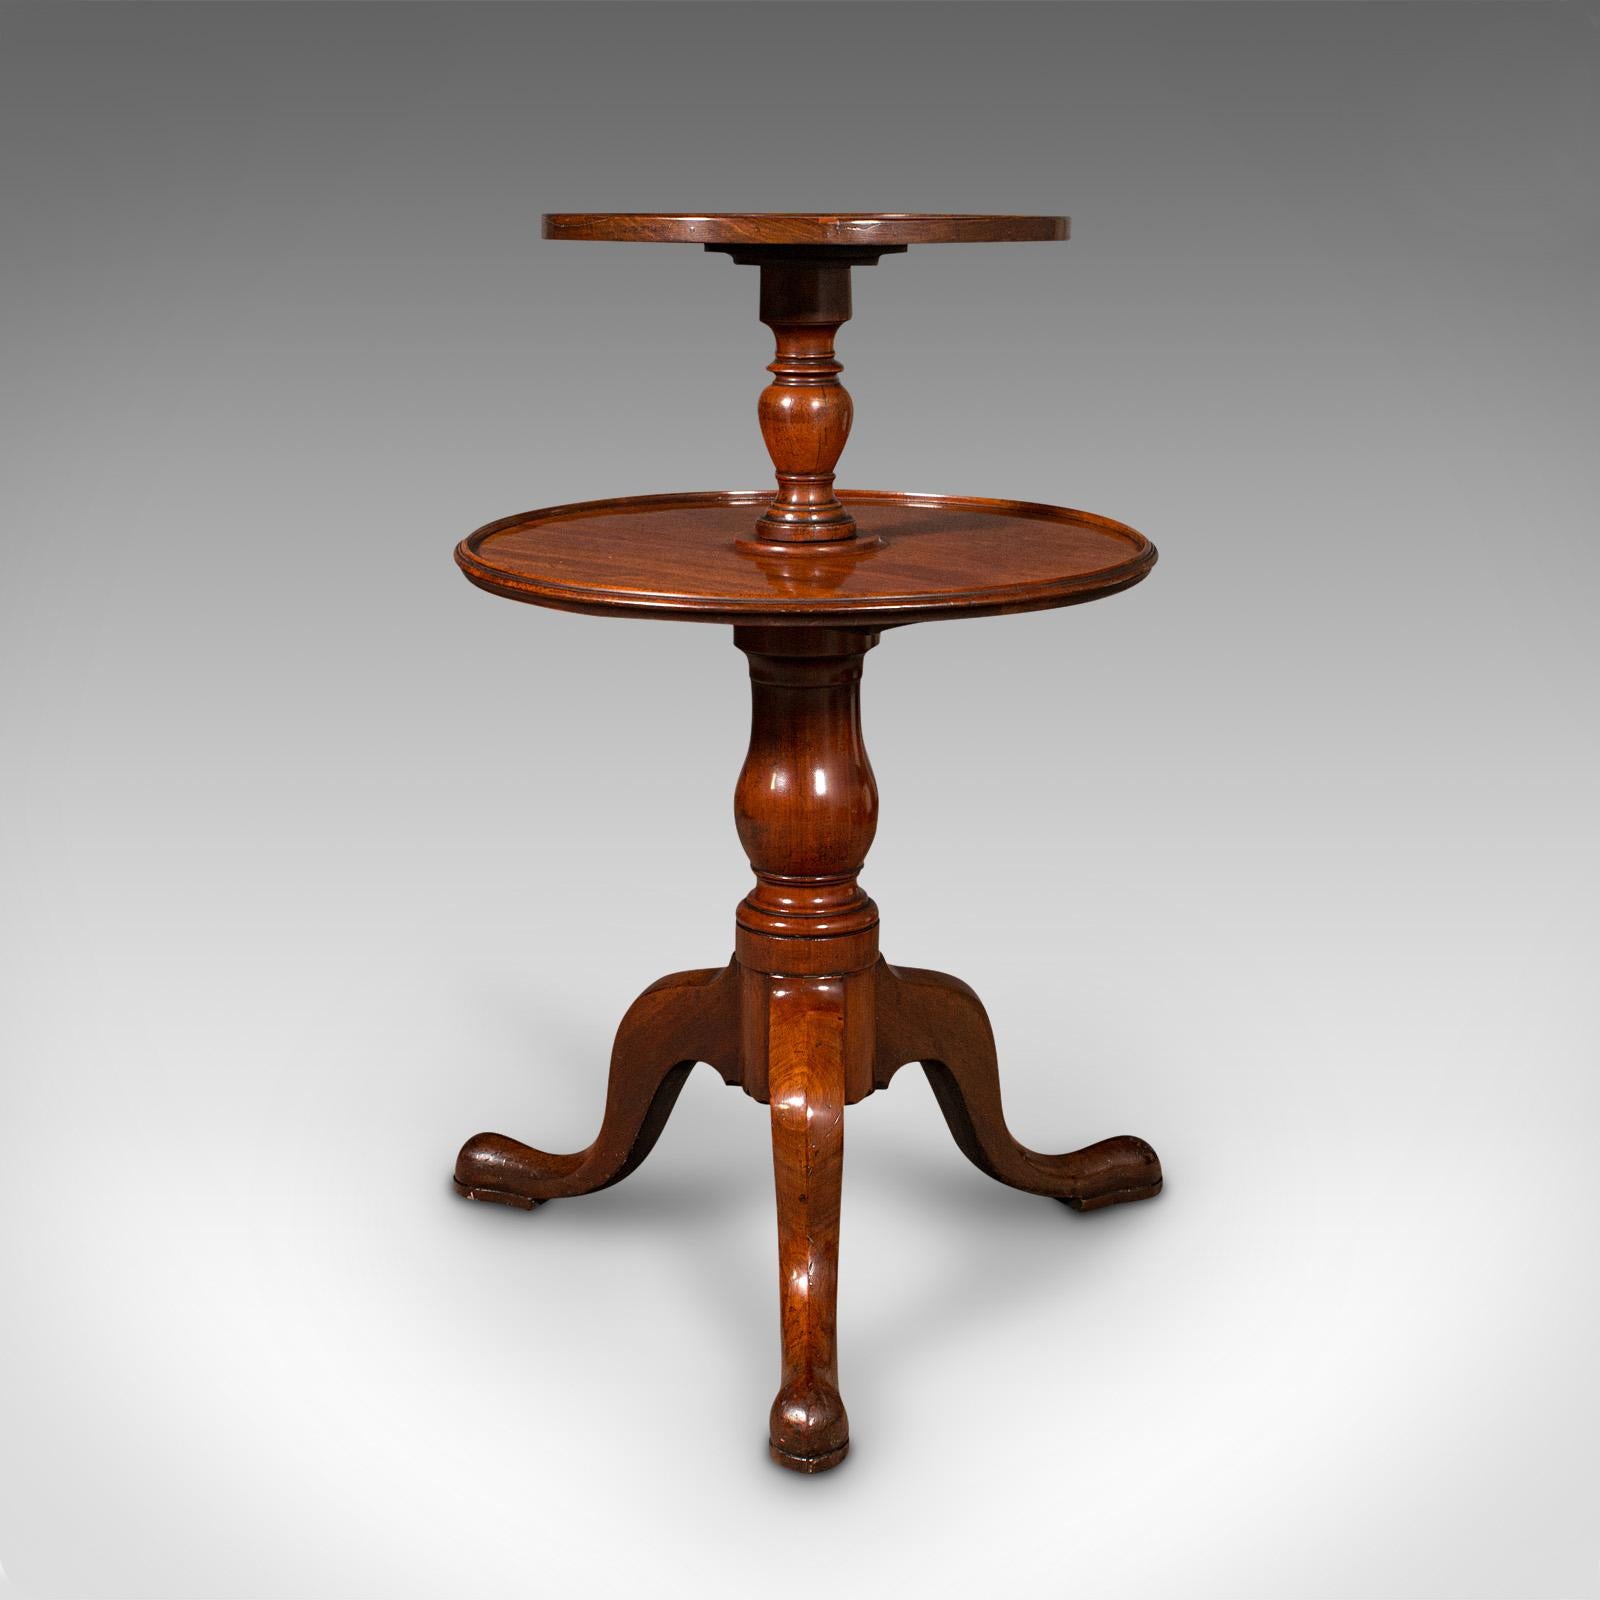 This is an antique country house dumb waiter. An English, mahogany 2-tier serving table, dating to the Georgian period, circa 1780.

Classic elegance and craftsmanship to this charming Georgian stand
Displays a desirable aged patina and in good